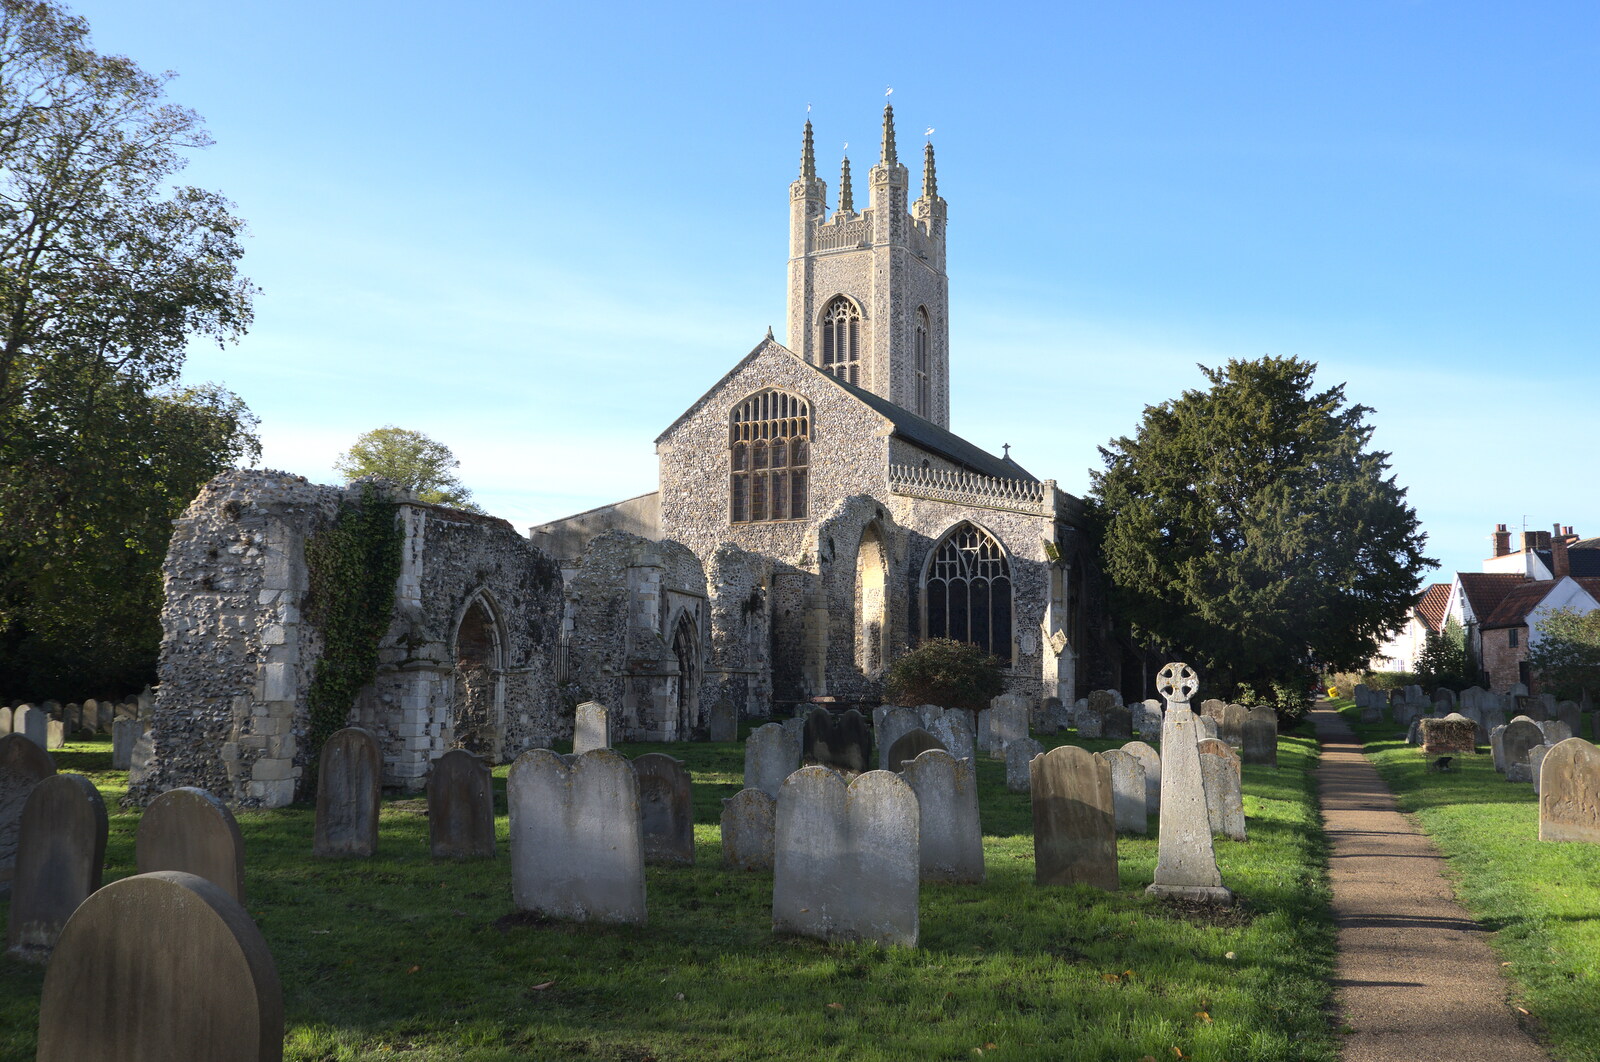 A Postcard from Bungay, Suffolk - 2nd November 2022: The graveyard and rear view of St. Mary's